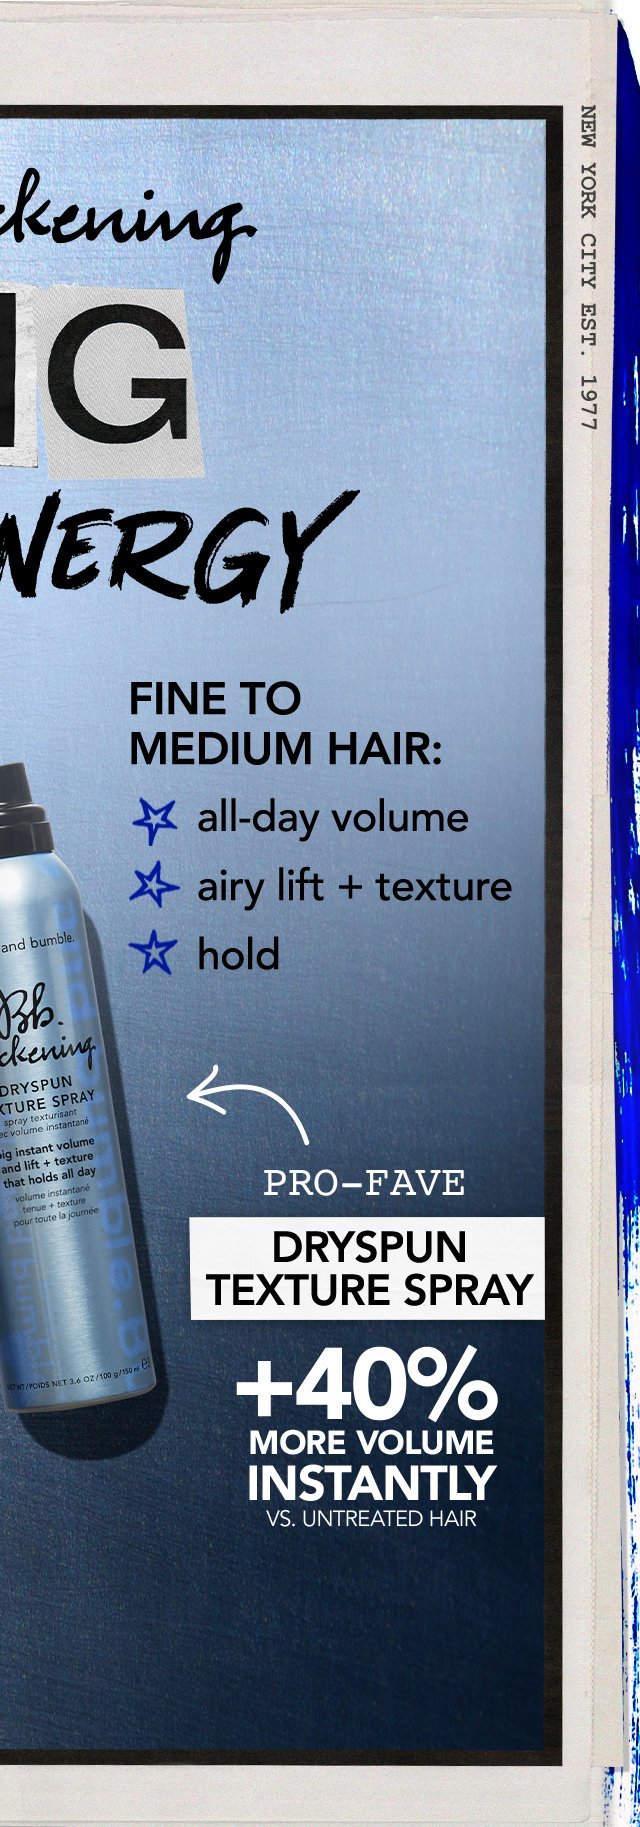 FINE TO MEDIUM HAIR: all-day volume | airy lift + texture | hold | PRO-FAVE | DRYSPUN TEXTURE SPRAY +40% MORE VOLUME INSTANTLY VS. UNTREATED HAIR